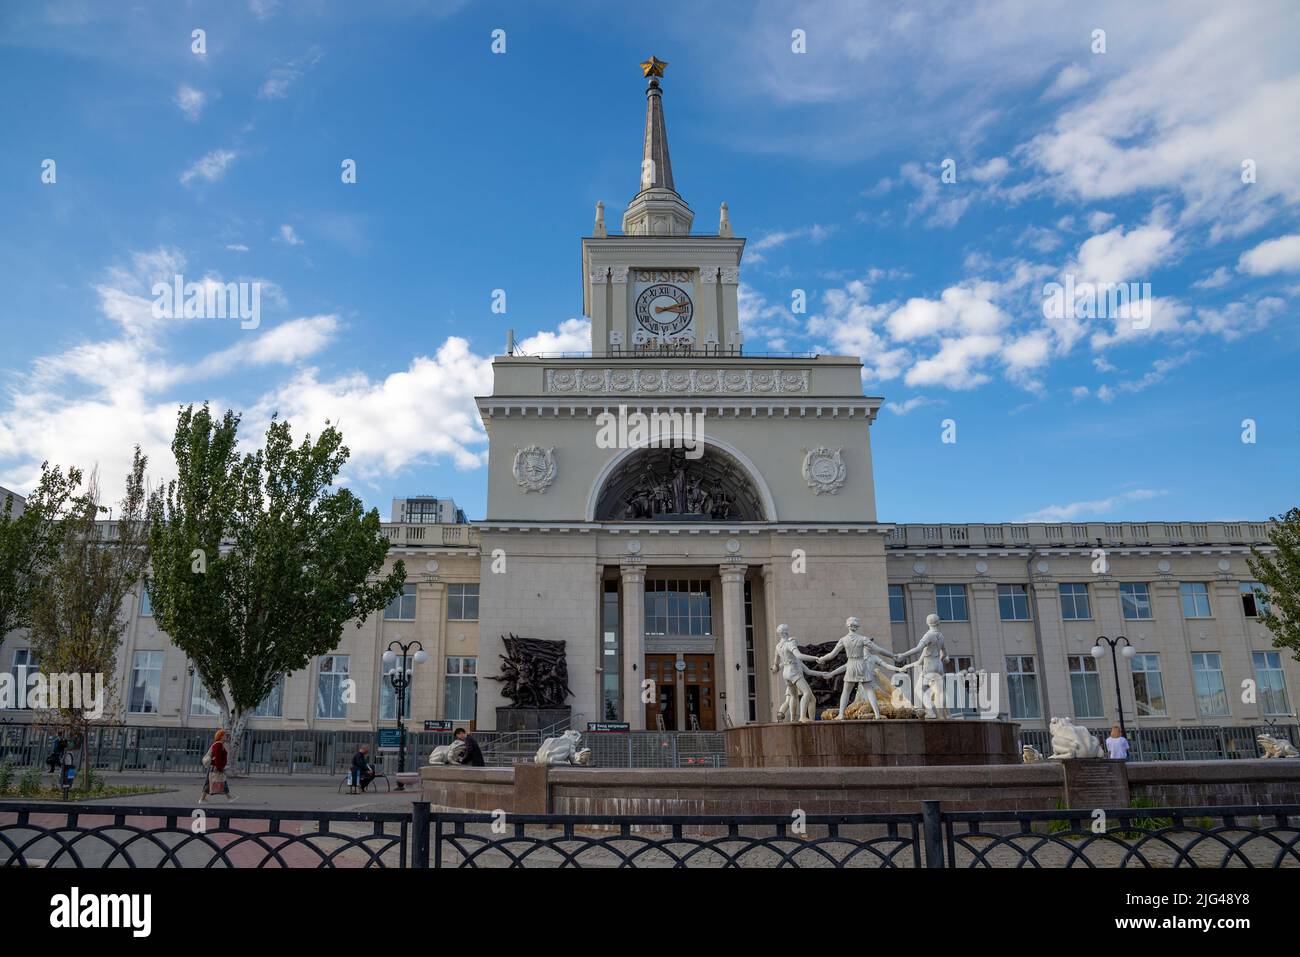 VOLGOGRAD, RUSSIA - SEPTEMBER 19, 2021: The famous reconstructed fountain 'Barmaley' (Children's round dance) at the railway station building. Volgogr Stock Photo